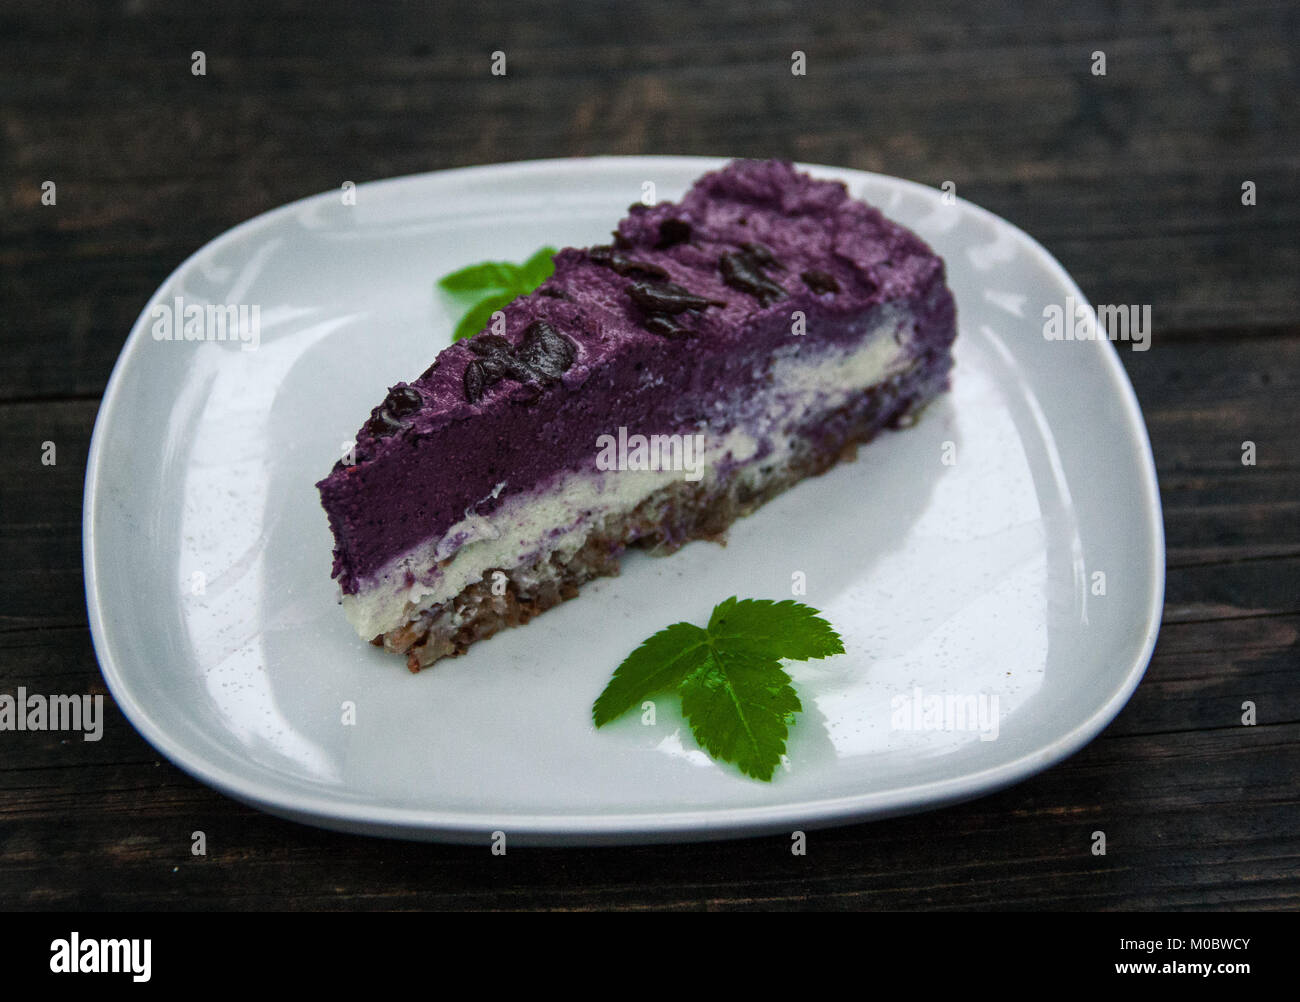 Piece of blueberry vegan pie laying on the white plate garnished with a sprig of mint Stock Photo